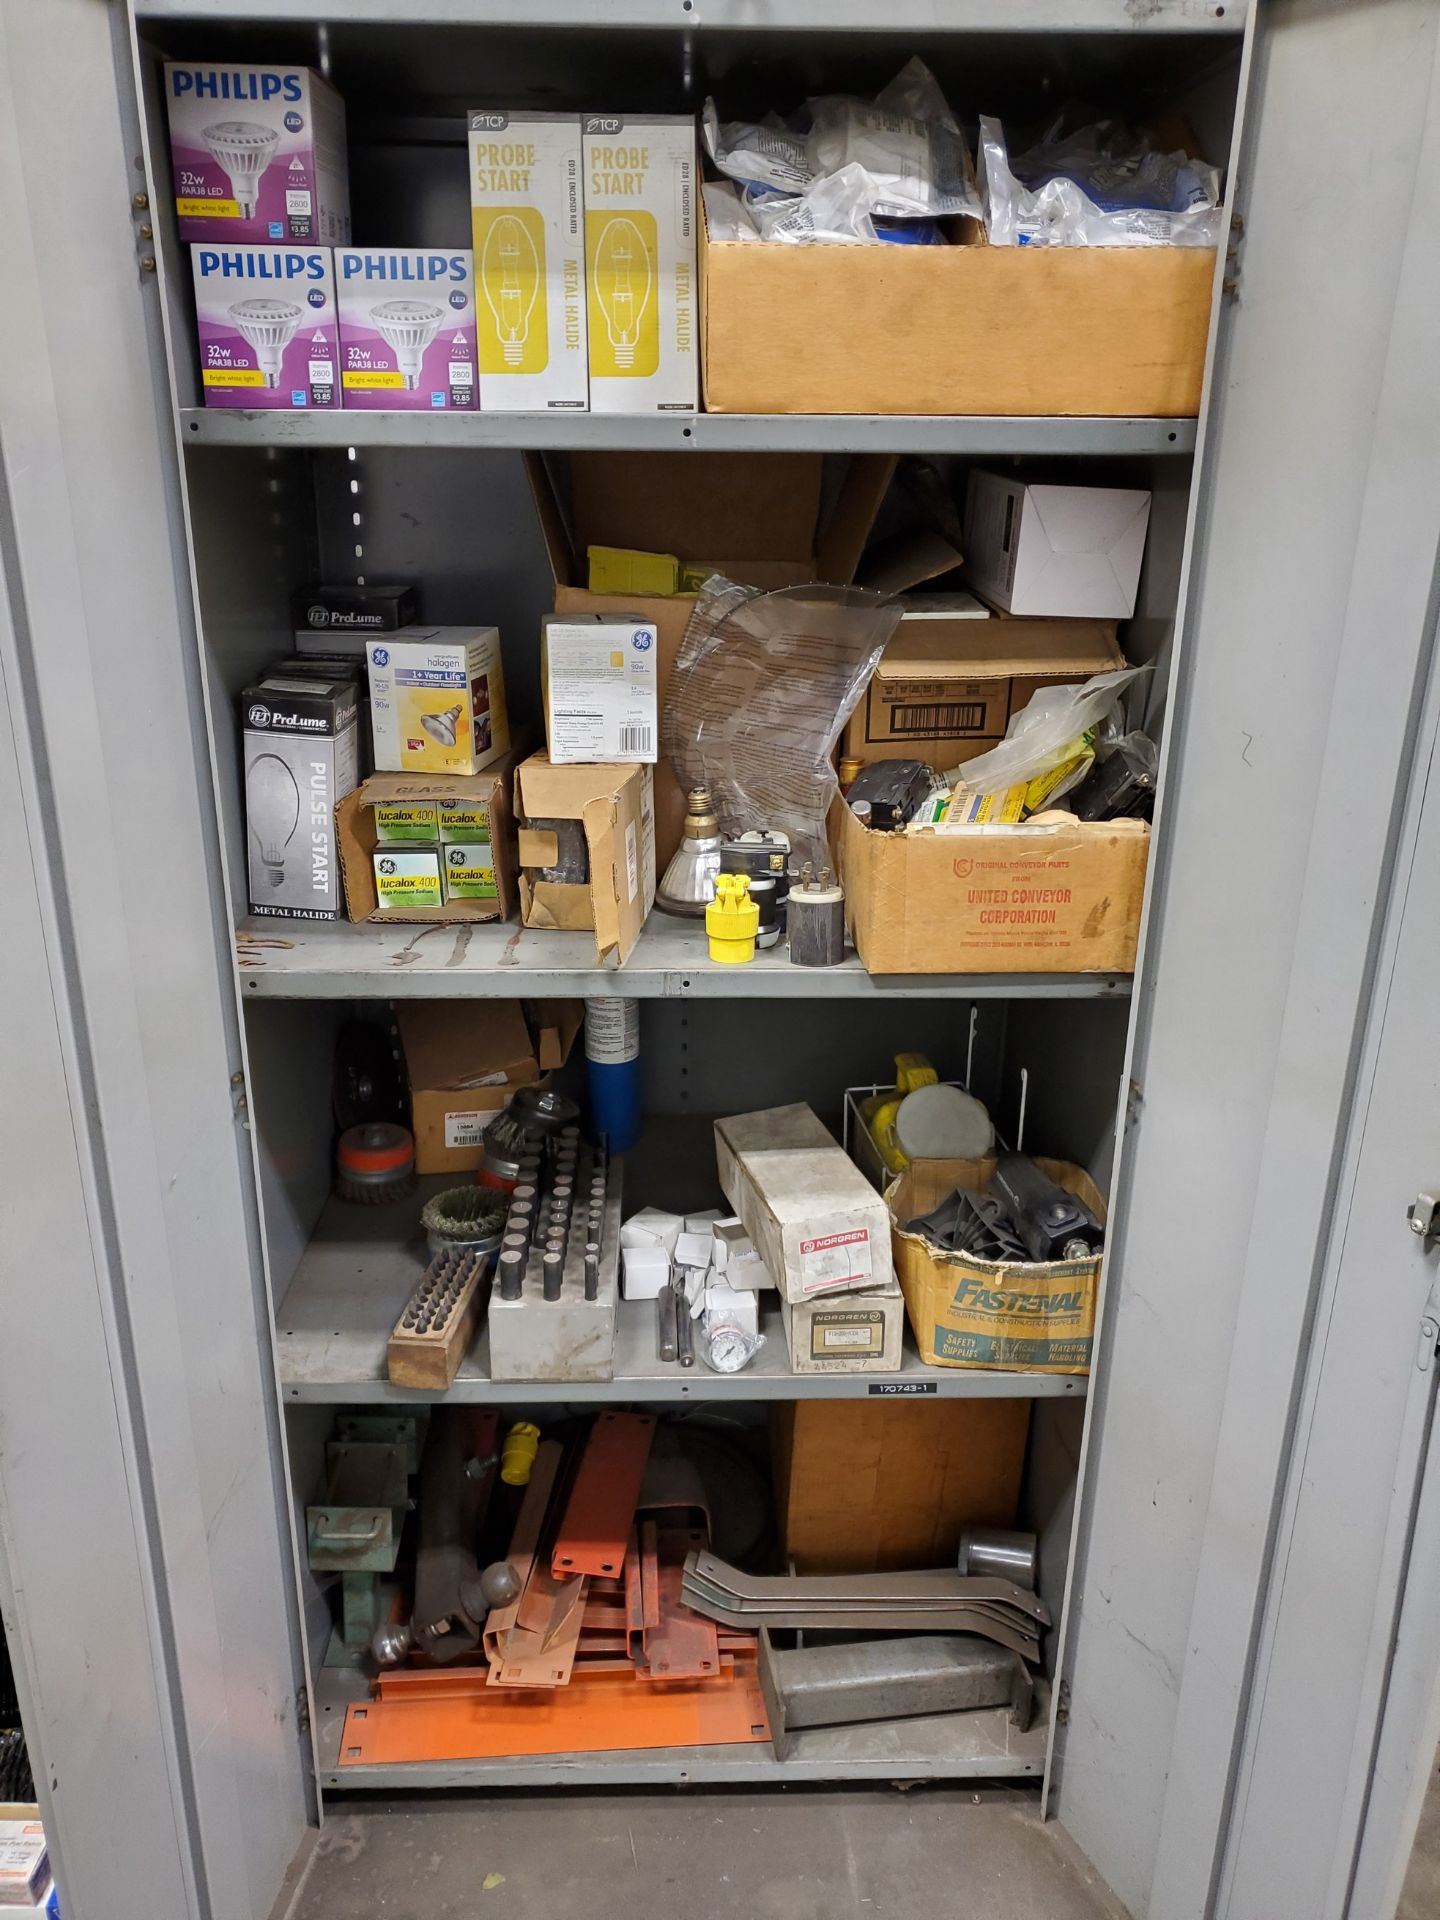 SHELVING UNIT W/ CONTENTS, RESPIRATOR, FILTERS, GLOVES, SAFETY STRAPS, MEDICAL WASTE BOX, BOOTS, - Image 5 of 12